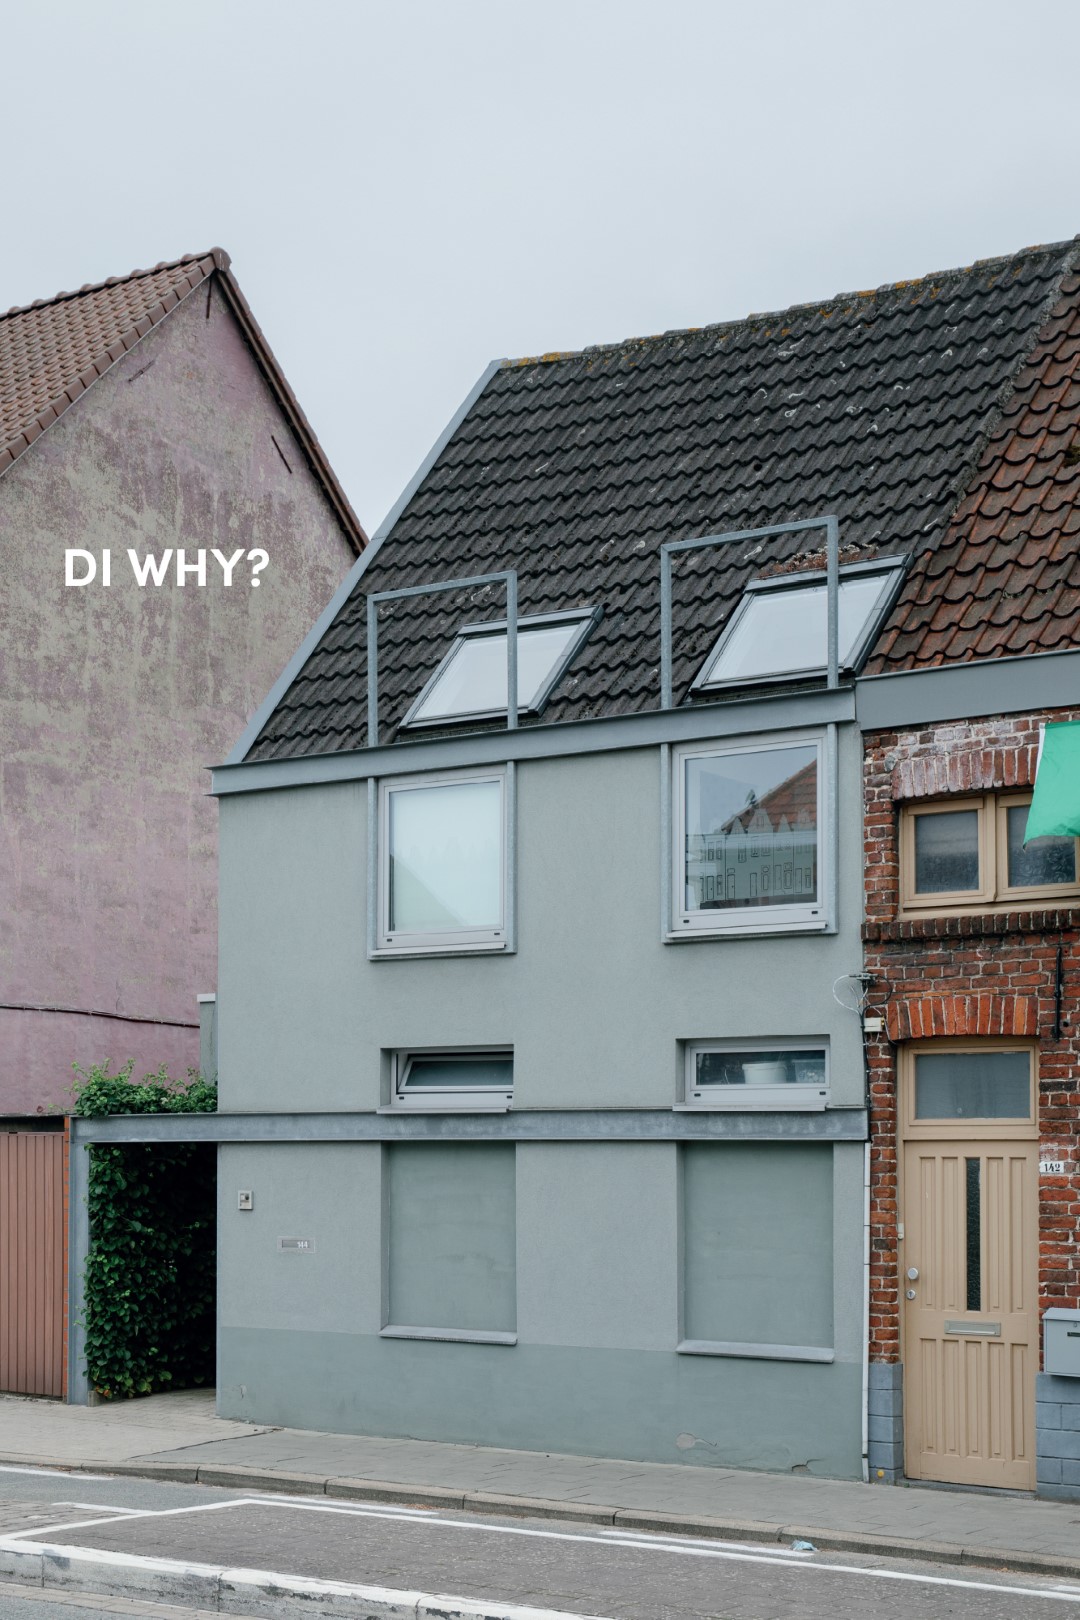 Ugly Belgian Houses - DI WHY?